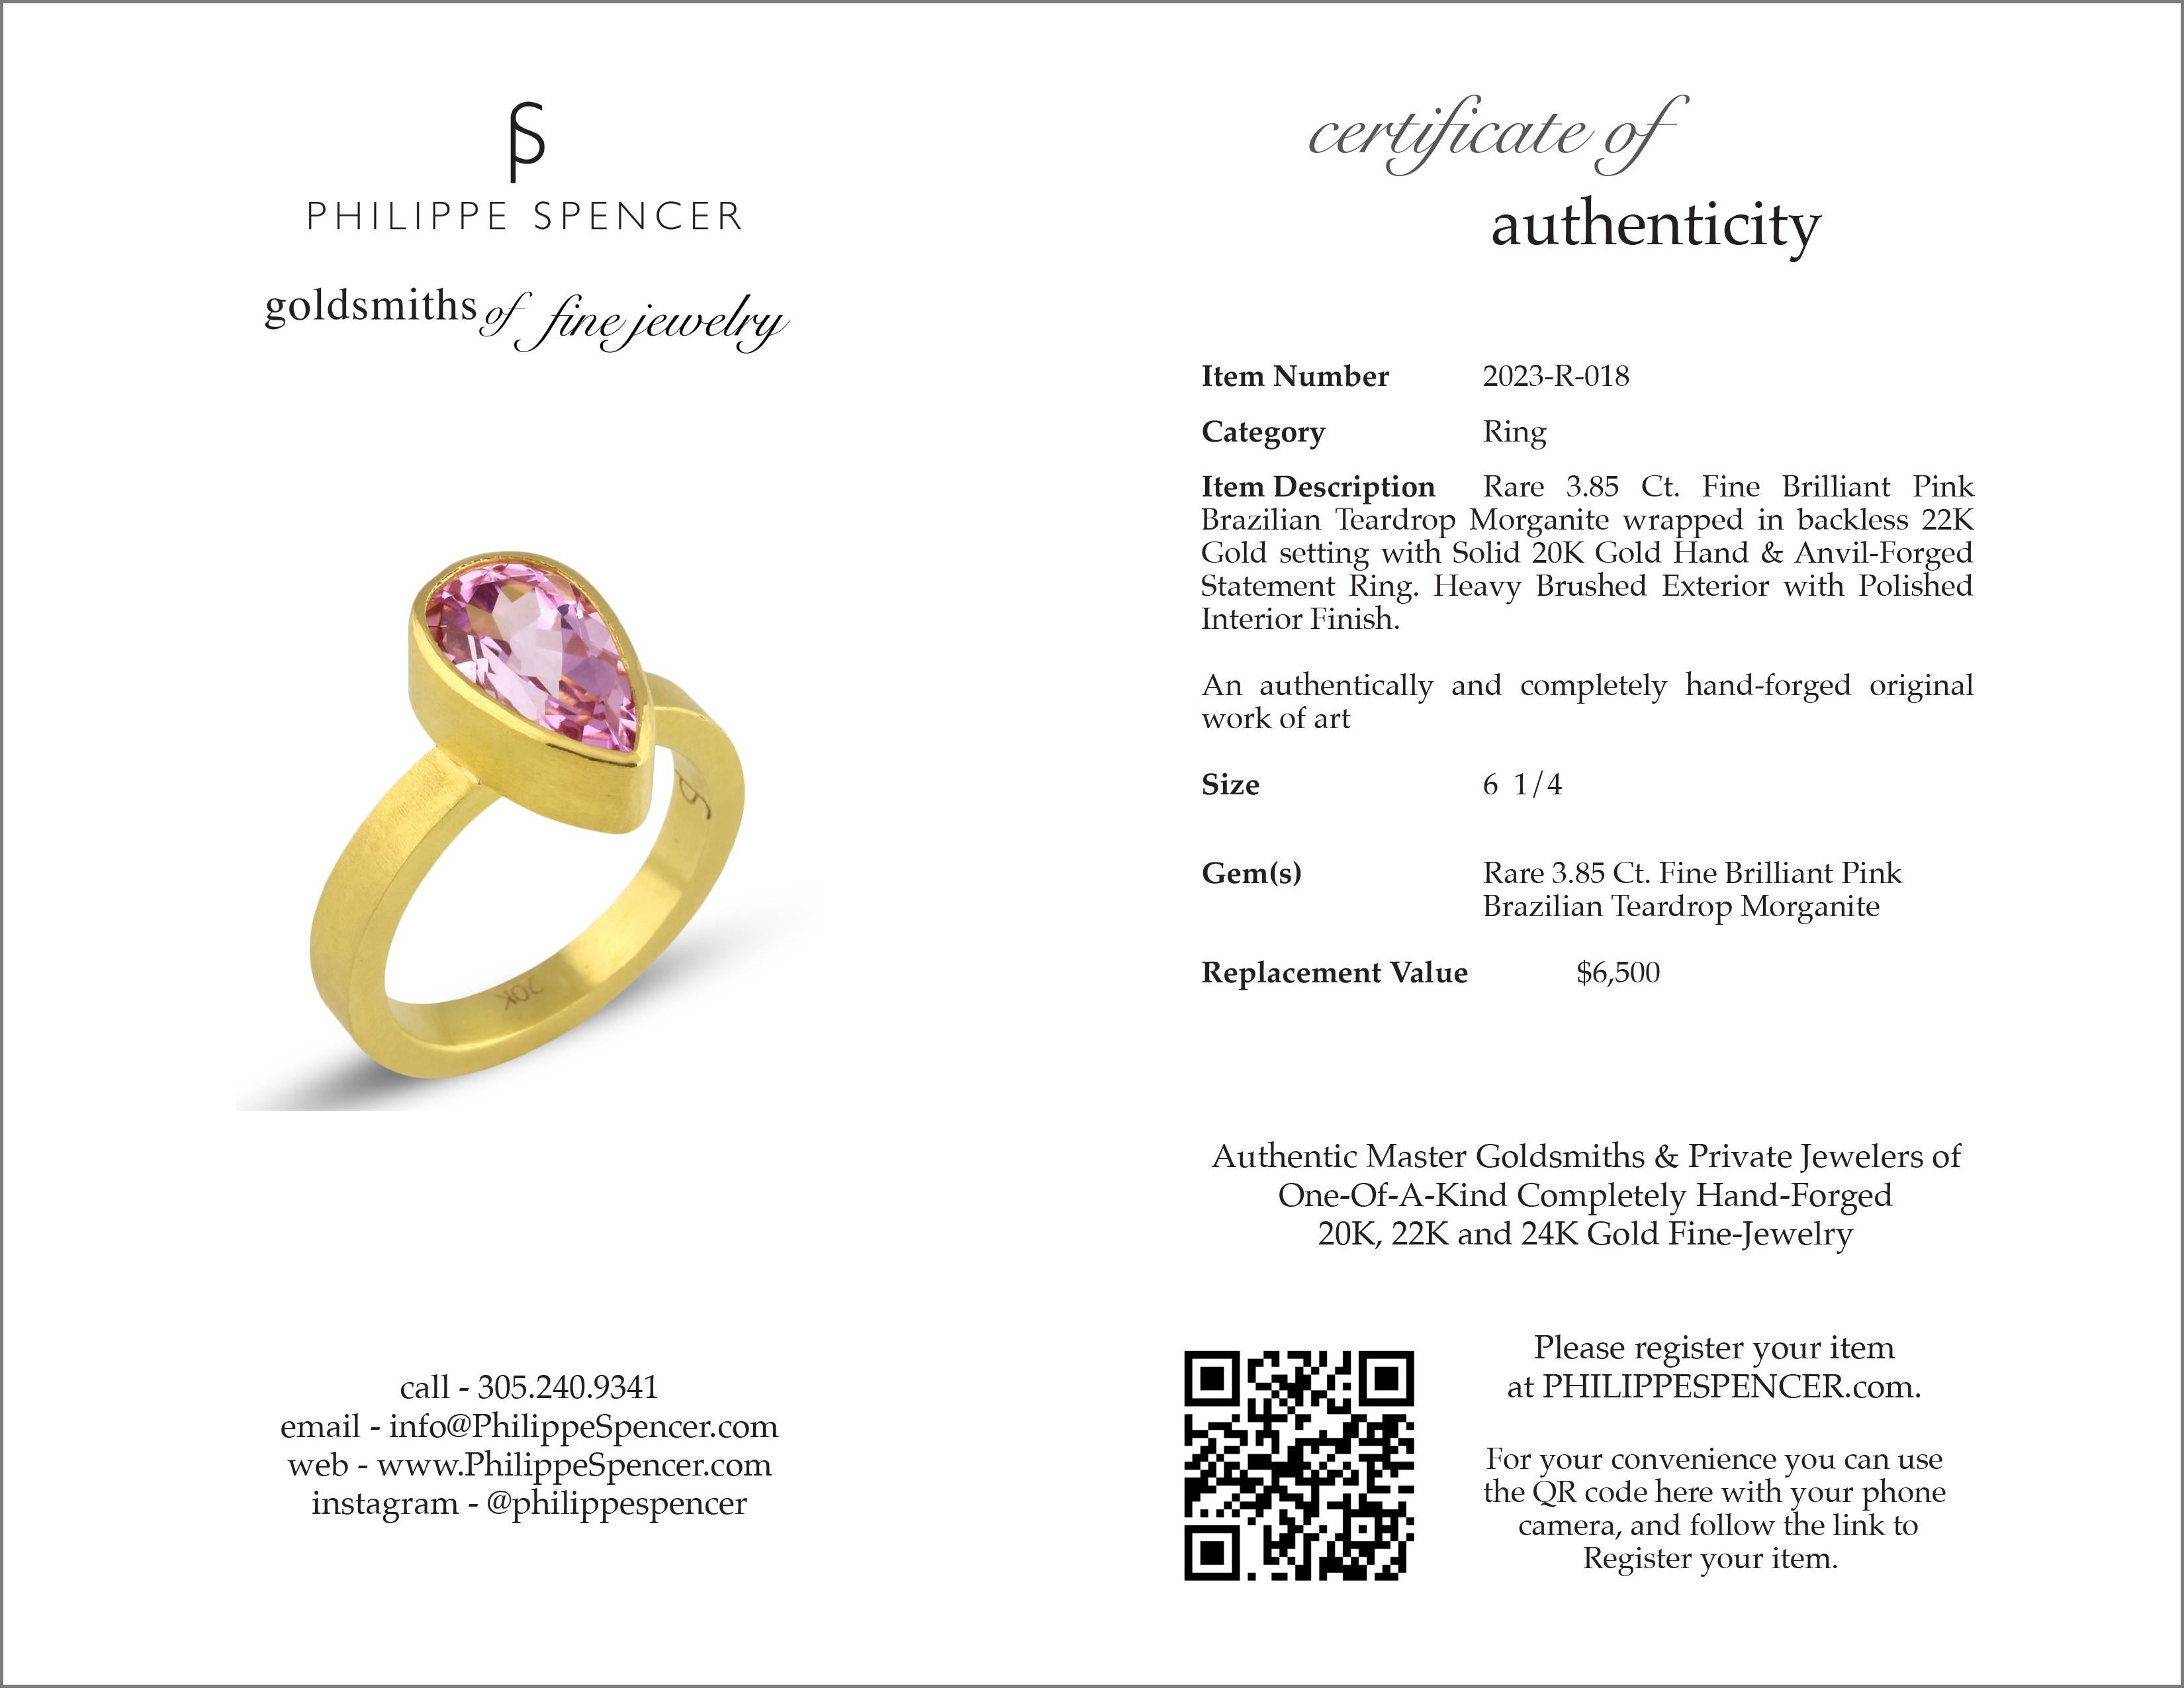 Pear Cut PHILIPPE SPENCER 3.85 Ct. Pink Morganite in 22K and 20K Gold Statement Ring For Sale